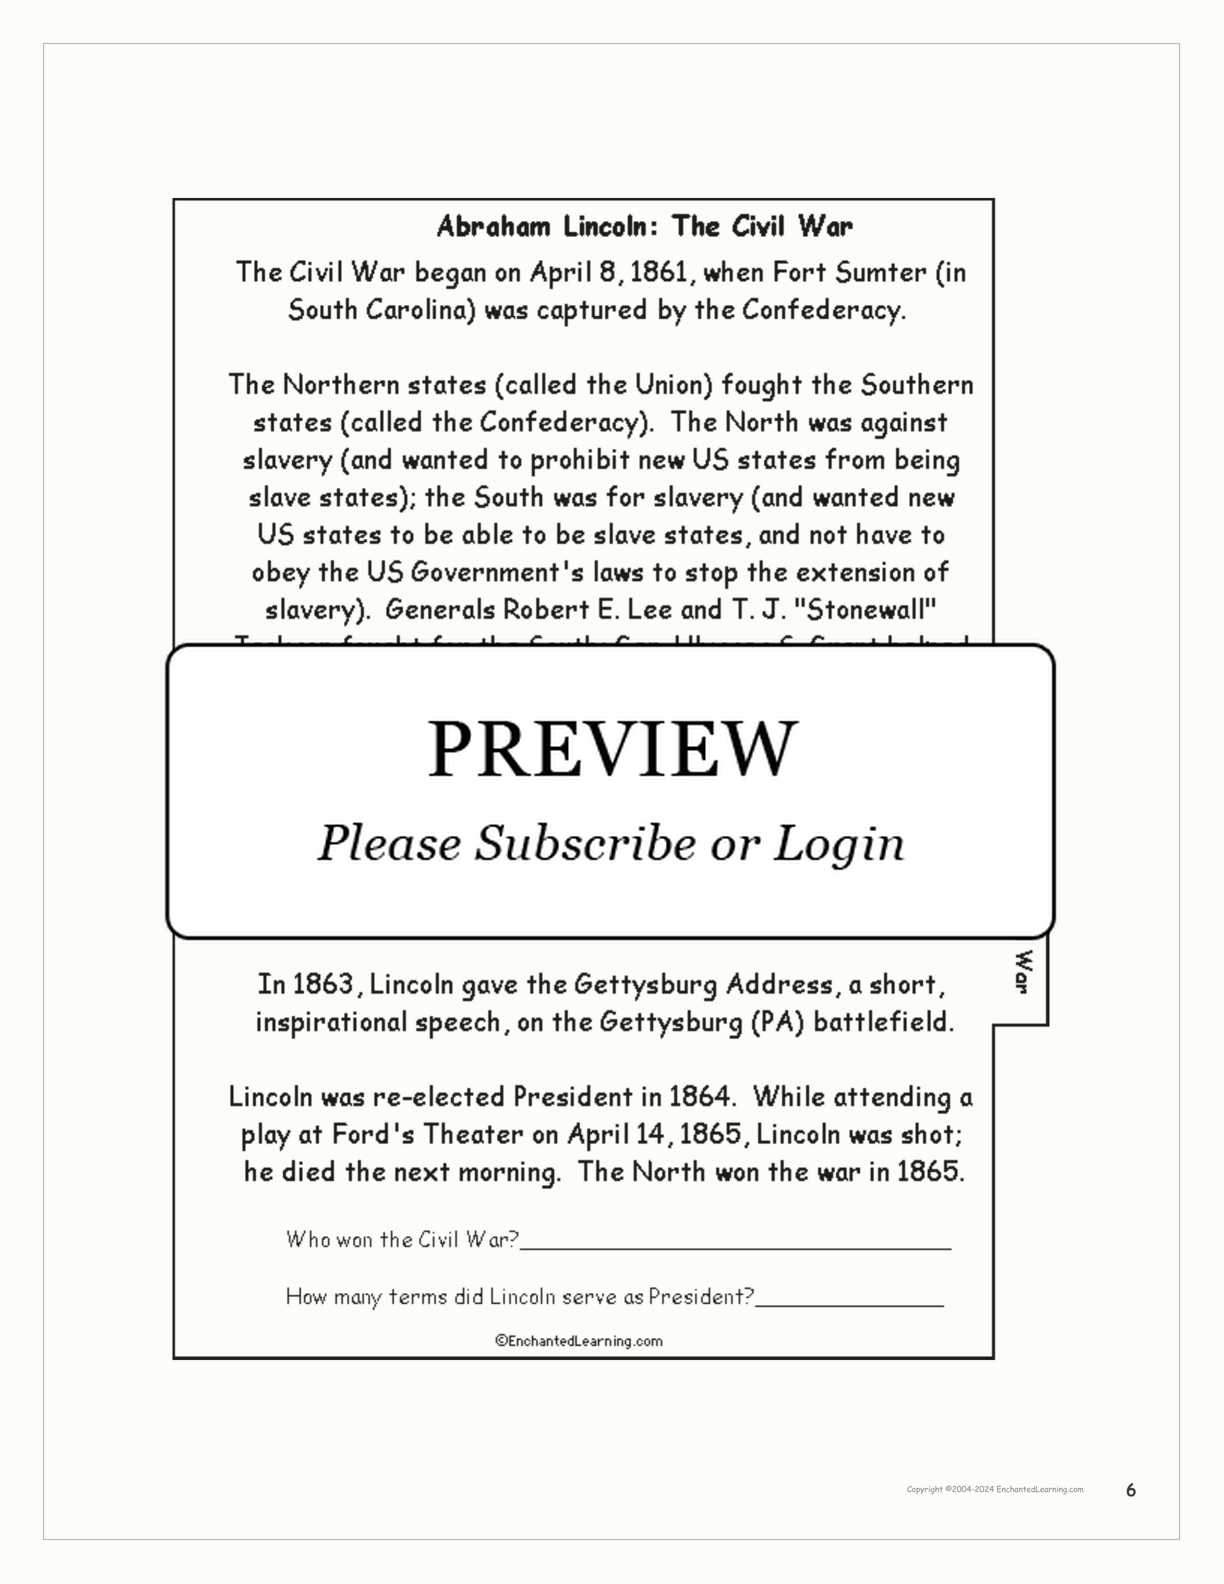 Abraham Lincoln Book interactive printout page 6